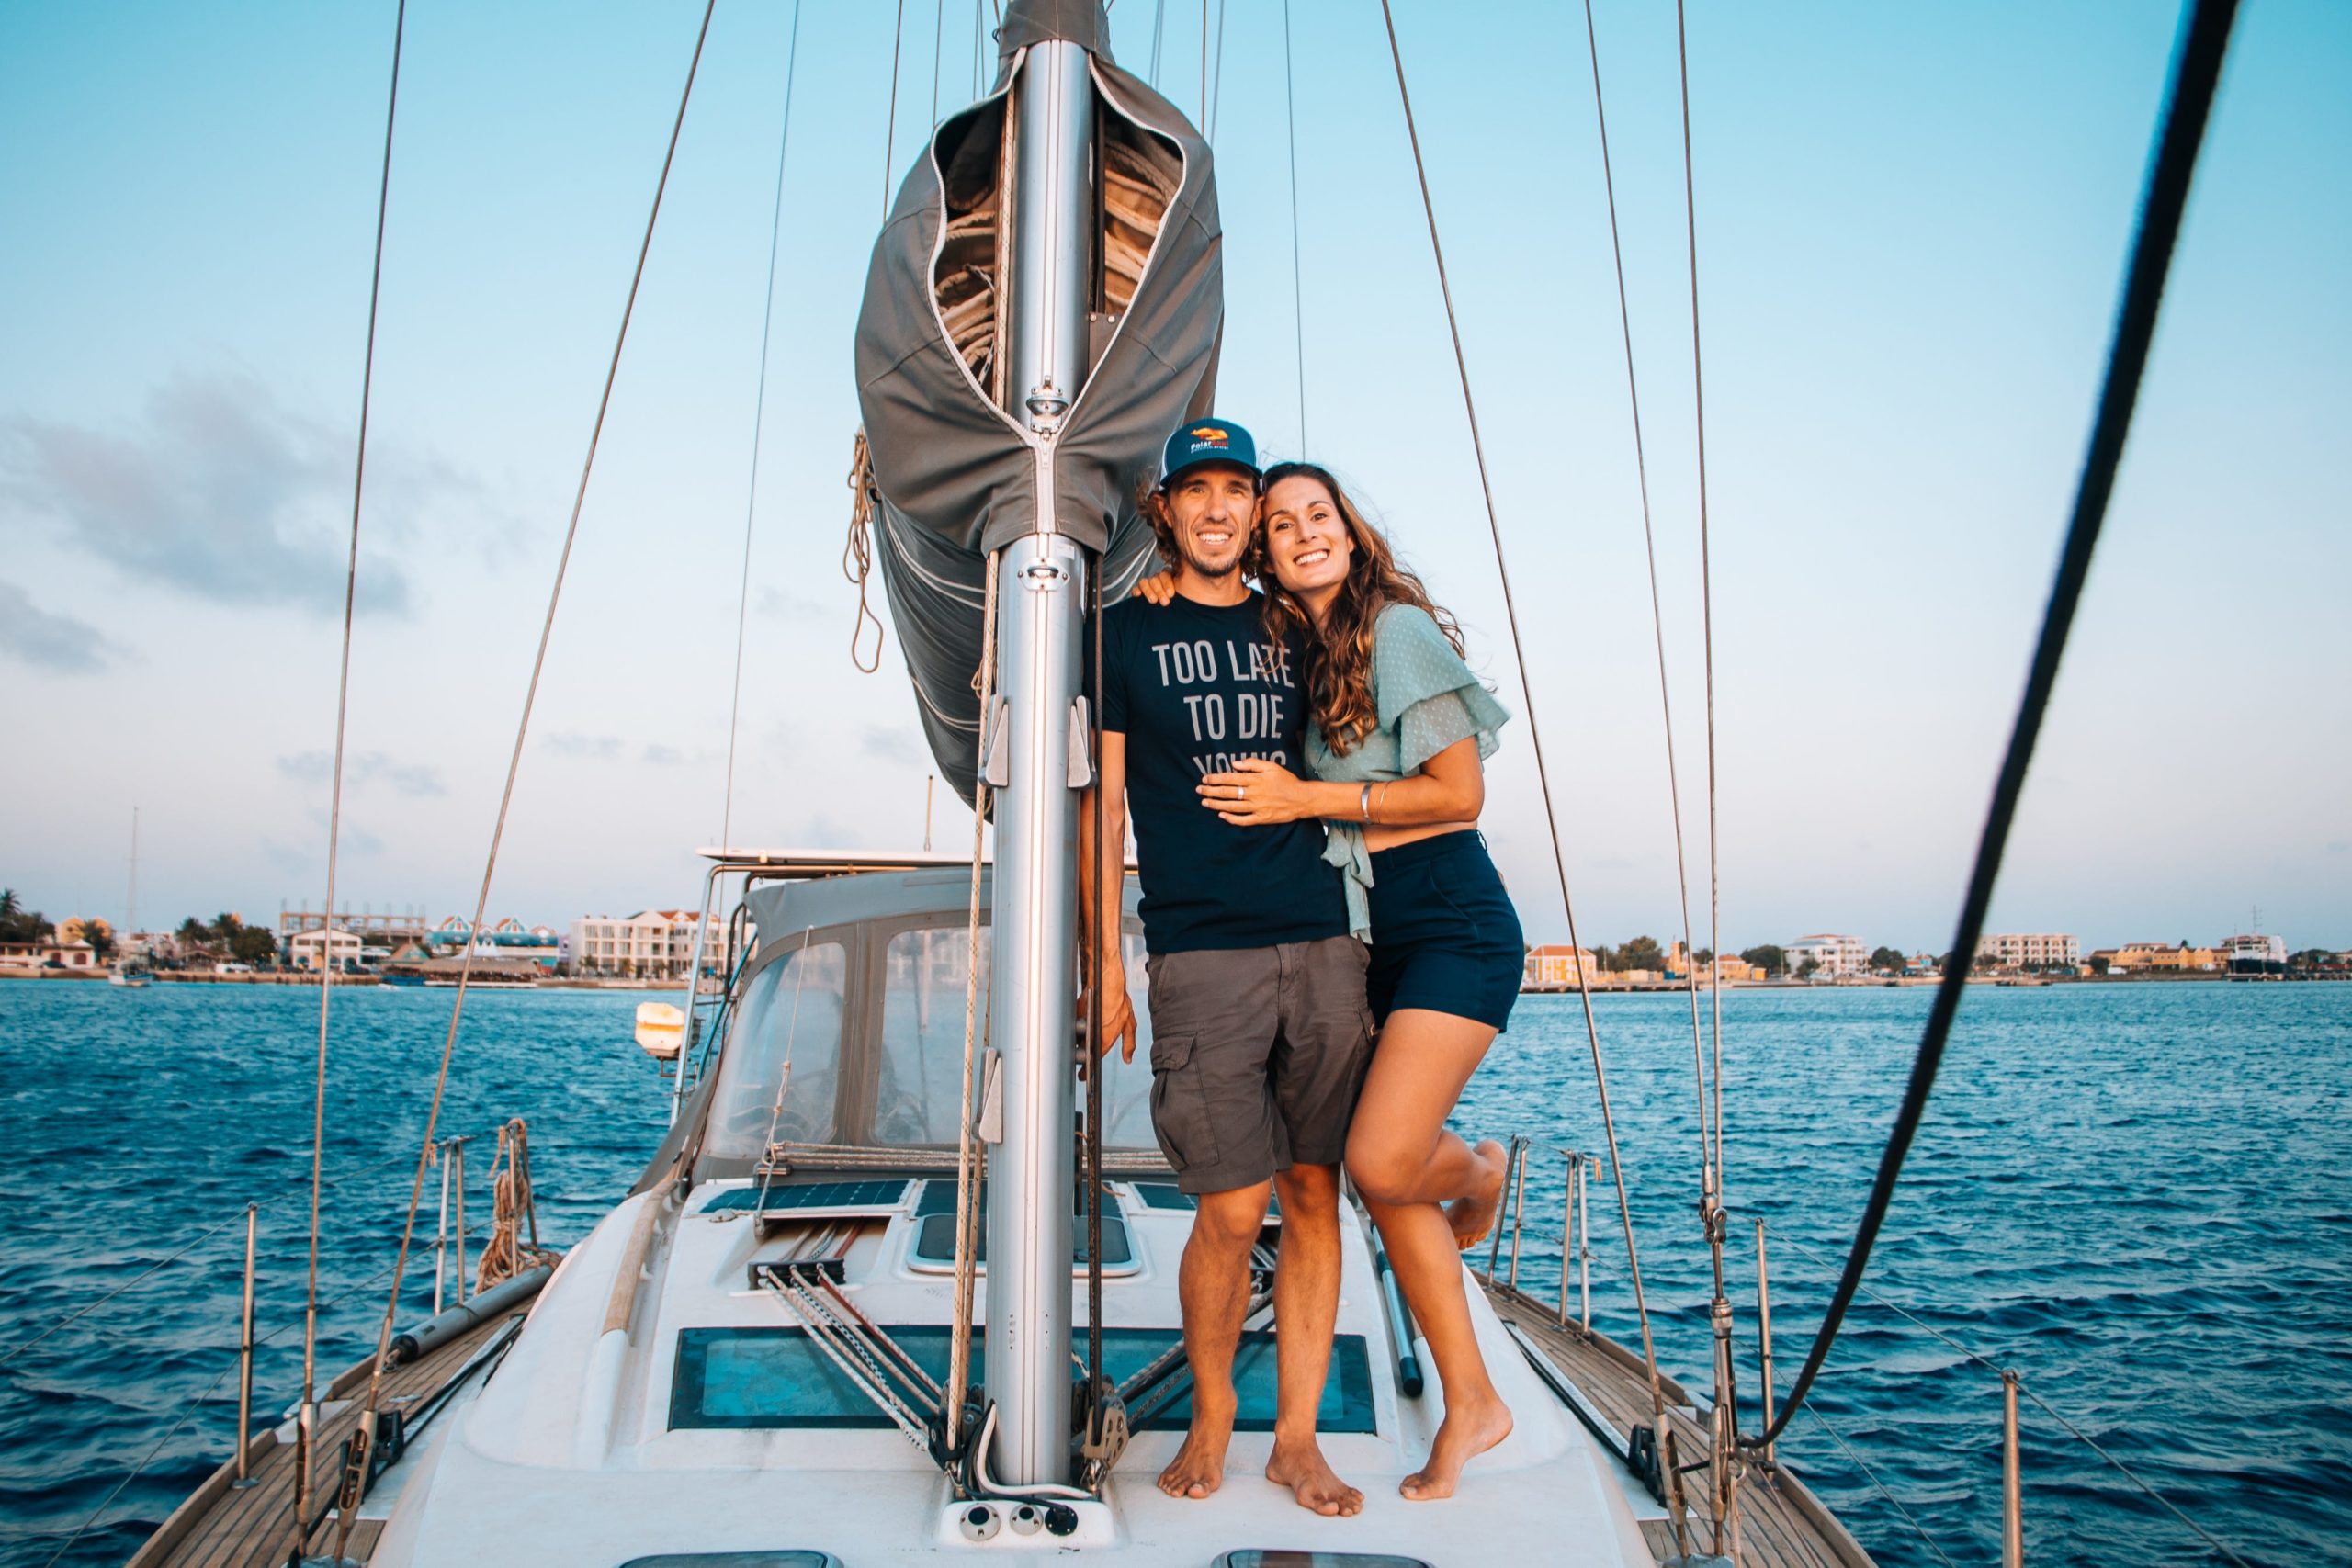 Sophie Darsy and Ryan Ellison left the corporate world behind to live on a sailboat.